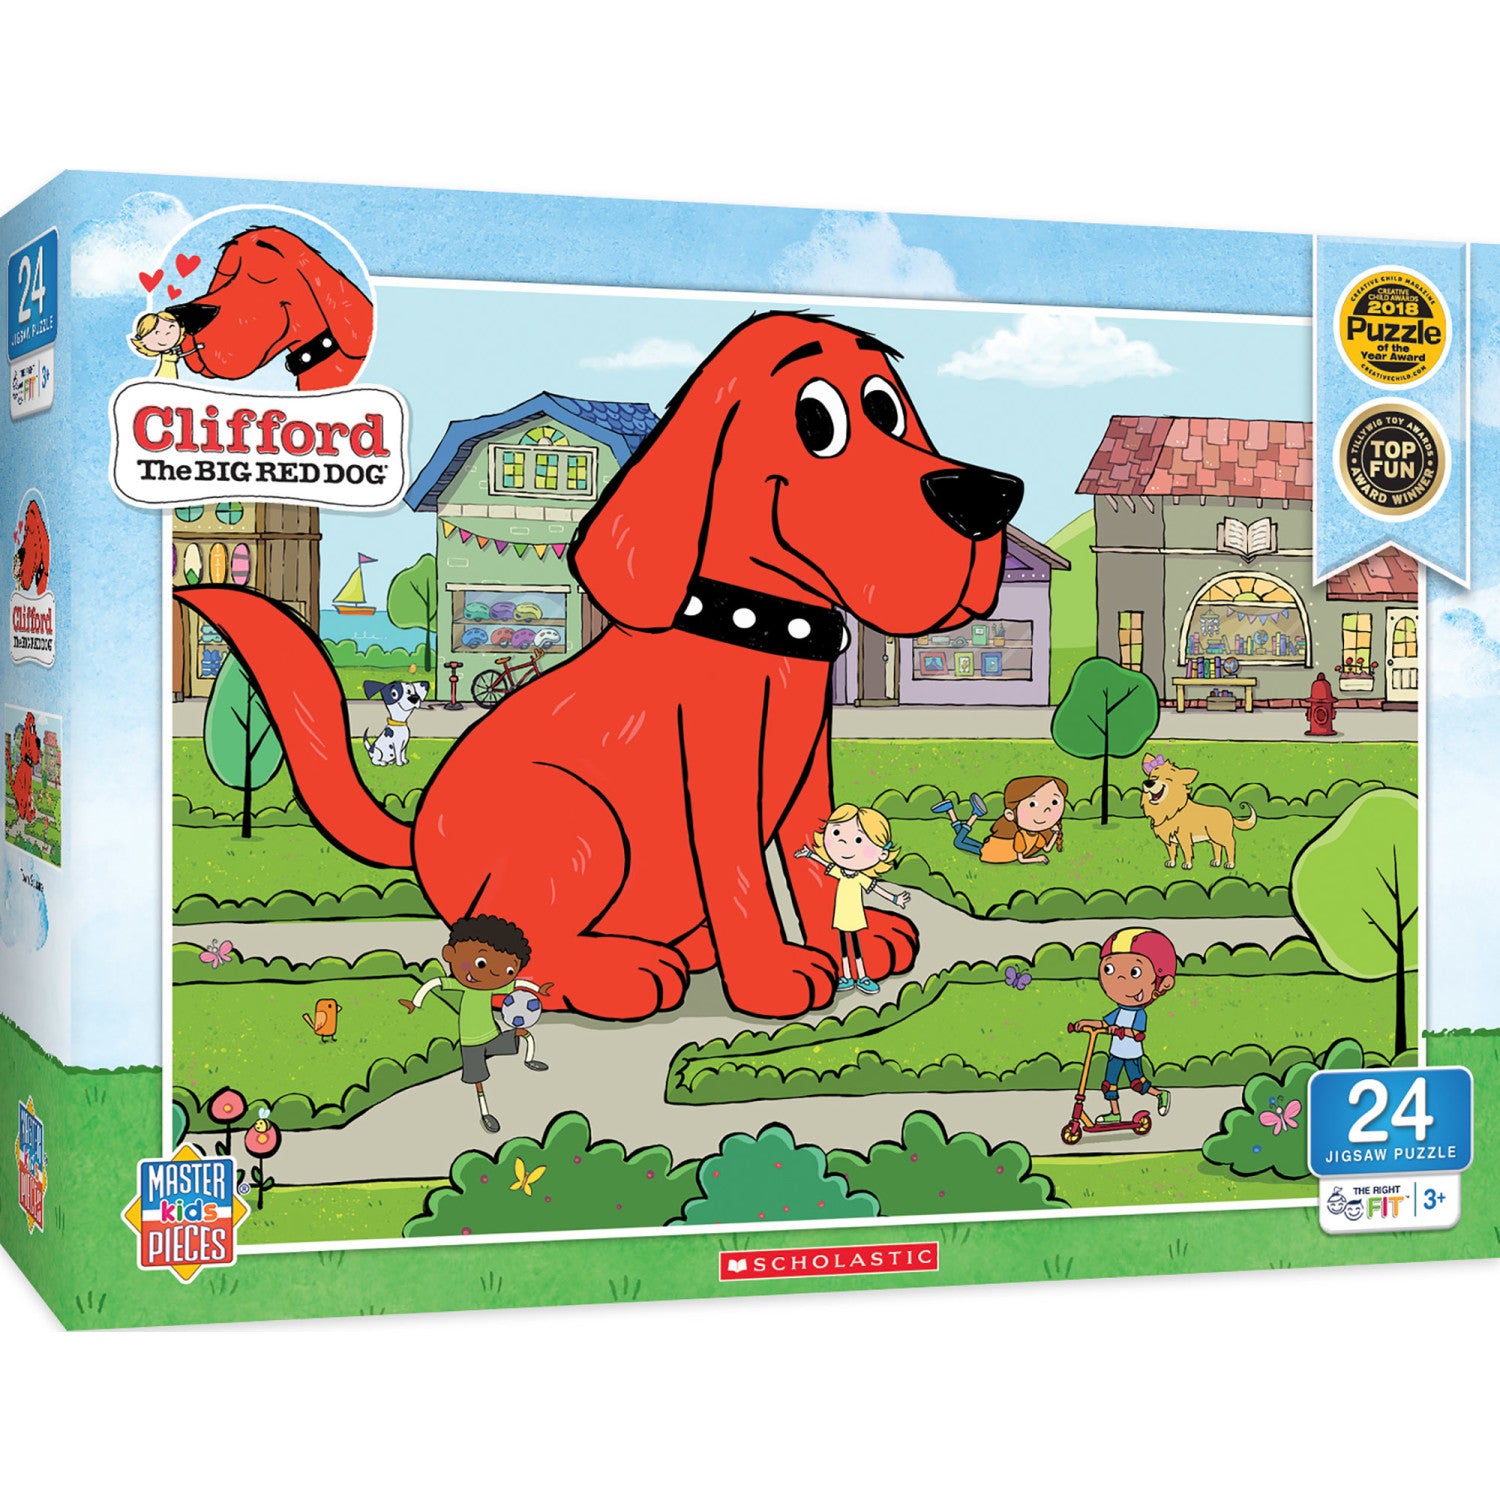 Clifford - Town Square 24 Piece Puzzle